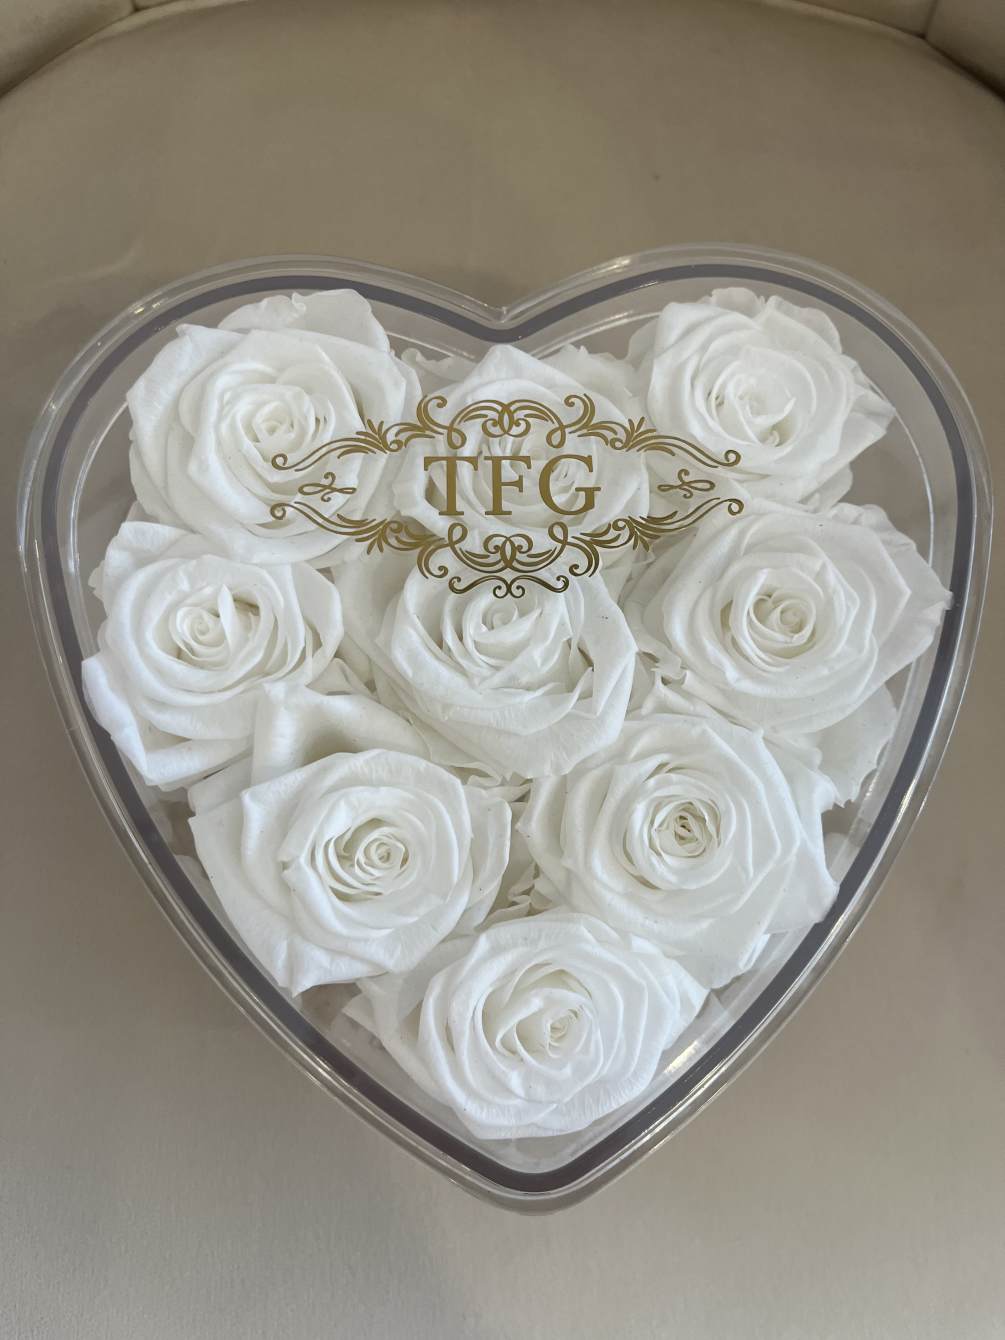 Preserved 9 white roses in acrylic heart shape box. Real roses that